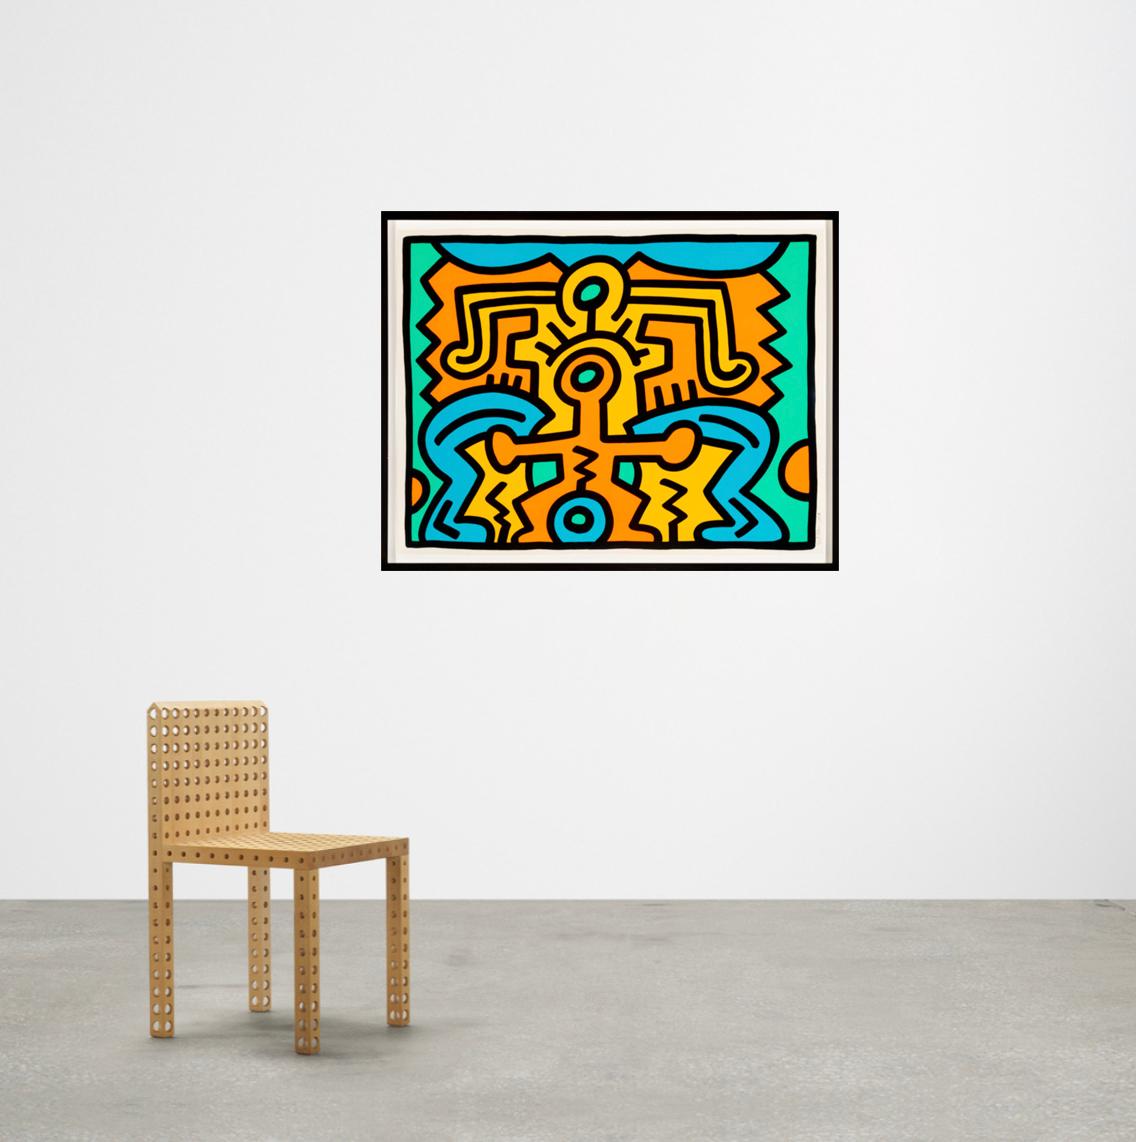 Artist: Keith Haring 
Title: Growing (Plate 5), from the Growing Portfolio
Size:  40 x 30 Inches (76.2 x 101.6 cm)
Medium: Screenprint in colors, on Lenox Museum Board, with full margins.
Edition: 15 of 100
Year: 1988
Notes: Signed, dated and